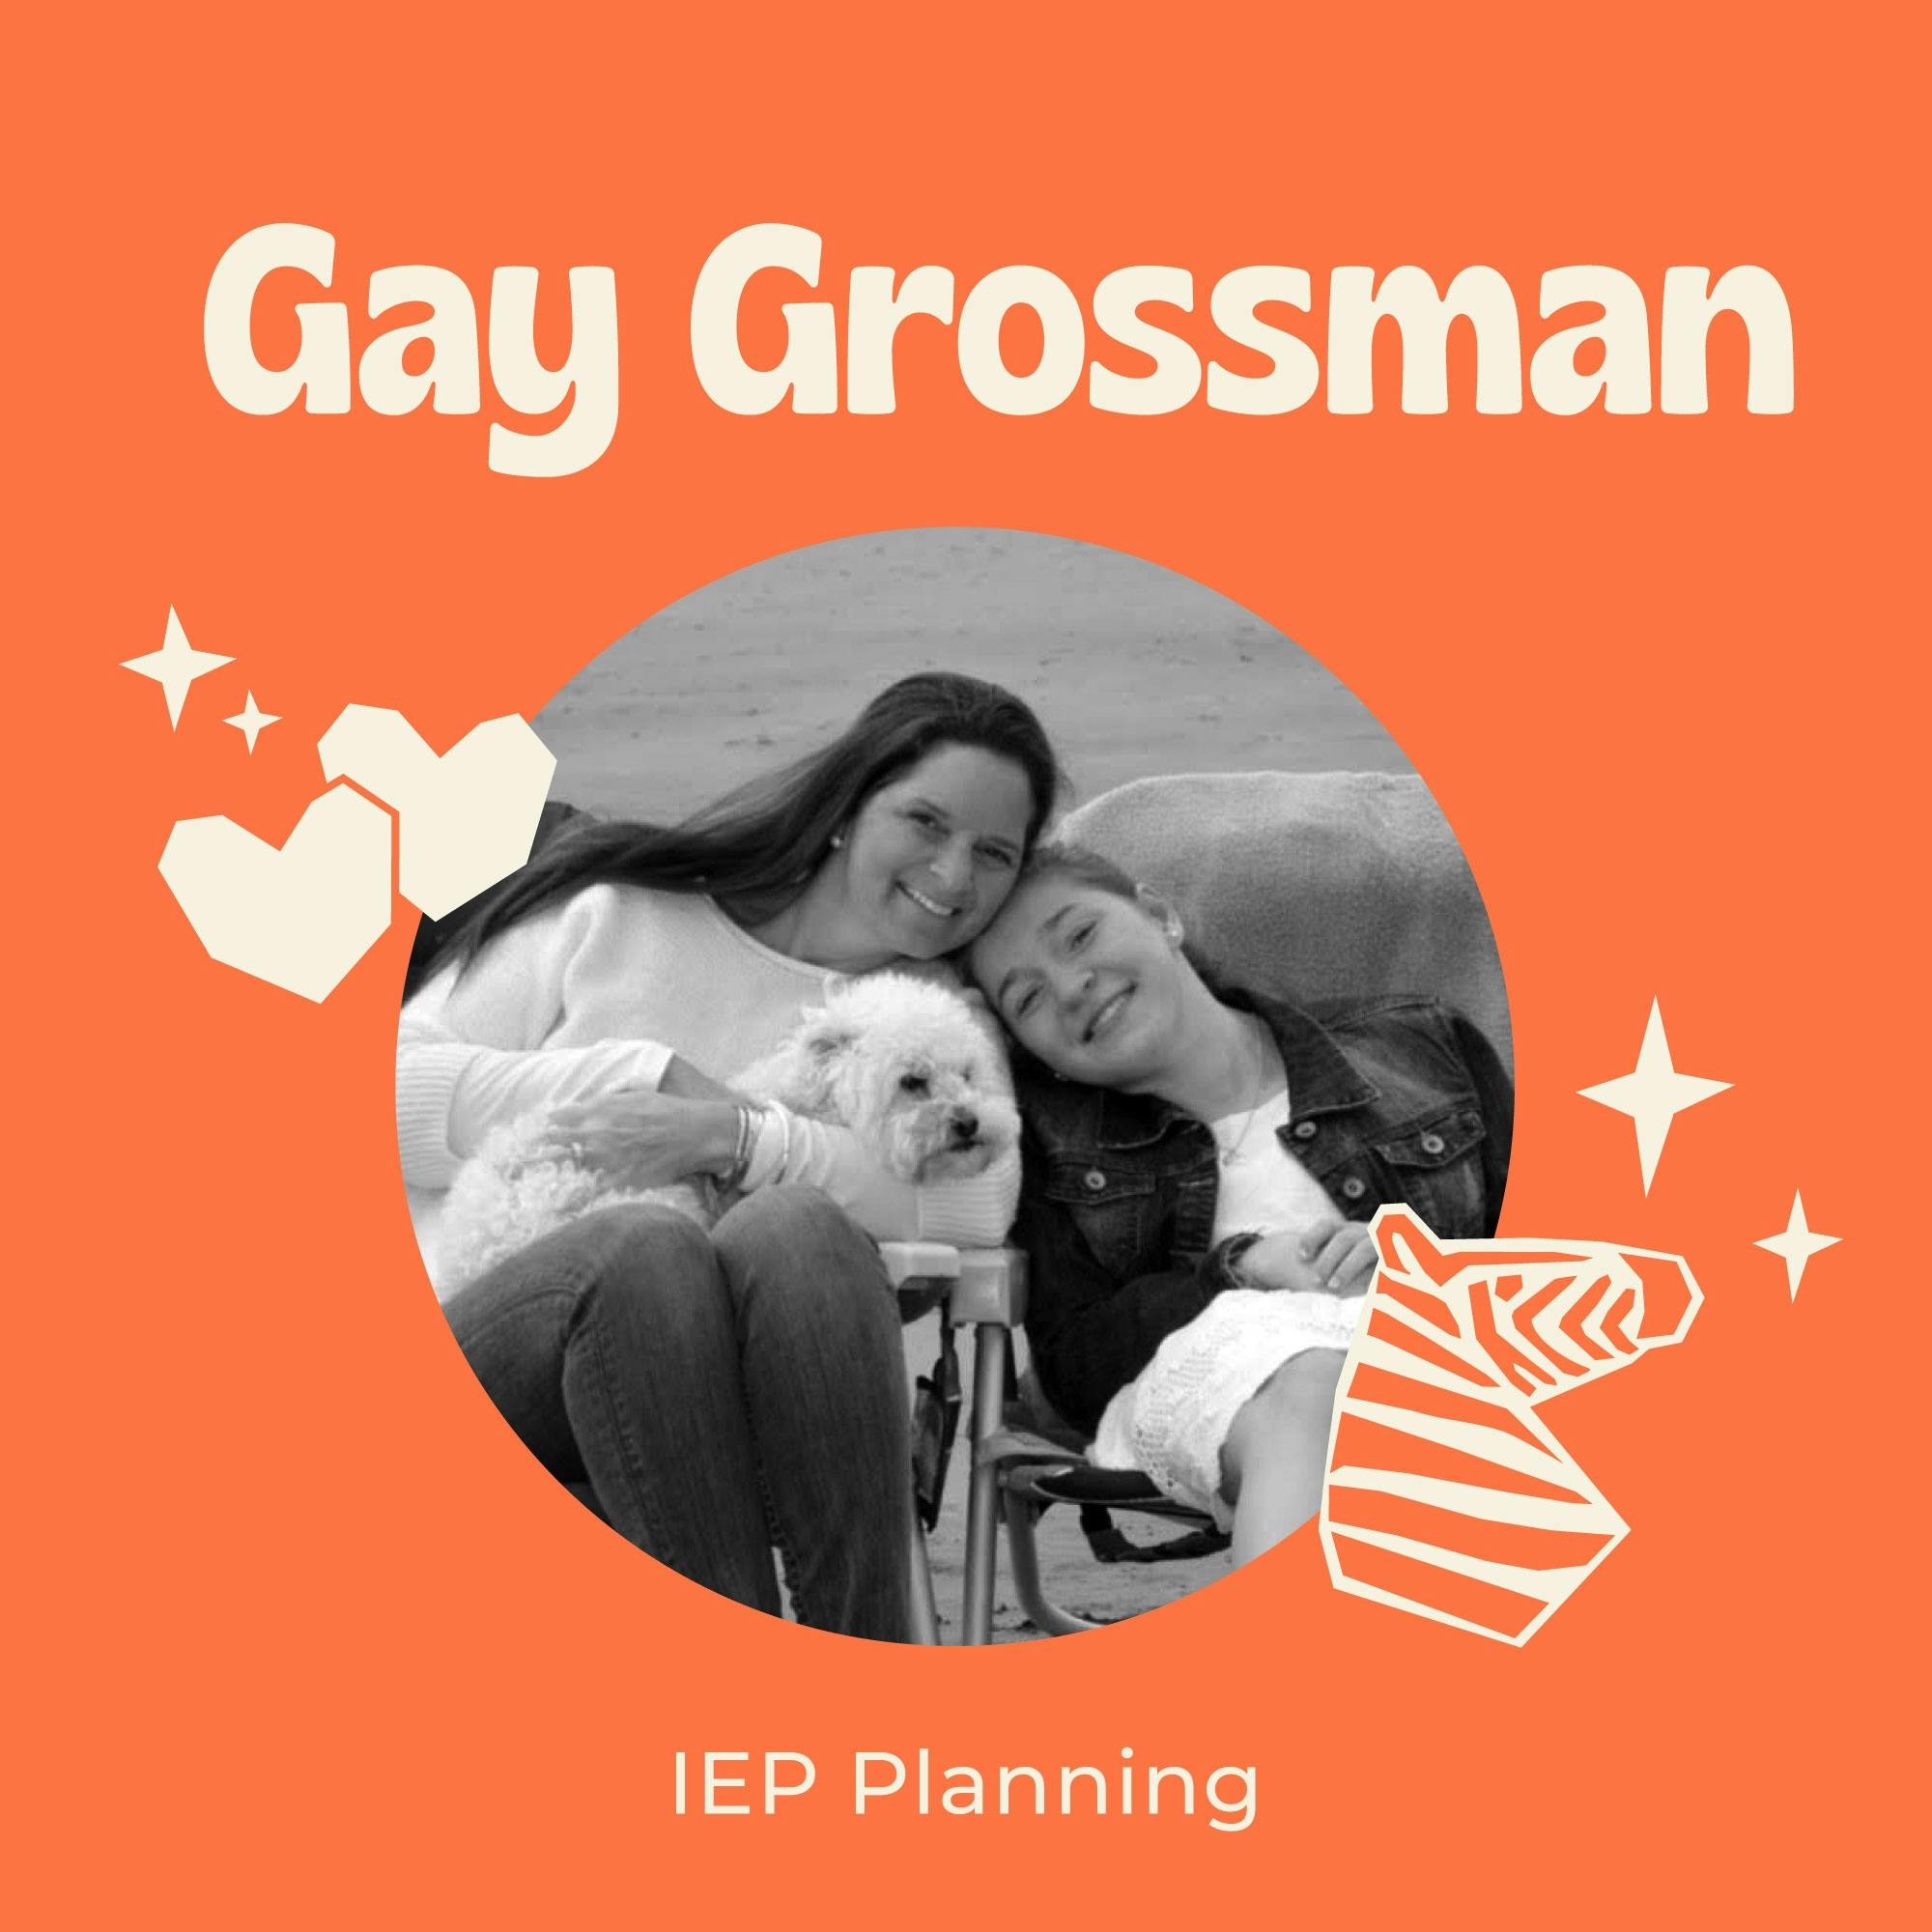 Summer Surfing – Get On Top of the IEP Wave – Things You Can Do This Summer to Make Next Year Better with Gay Grossman